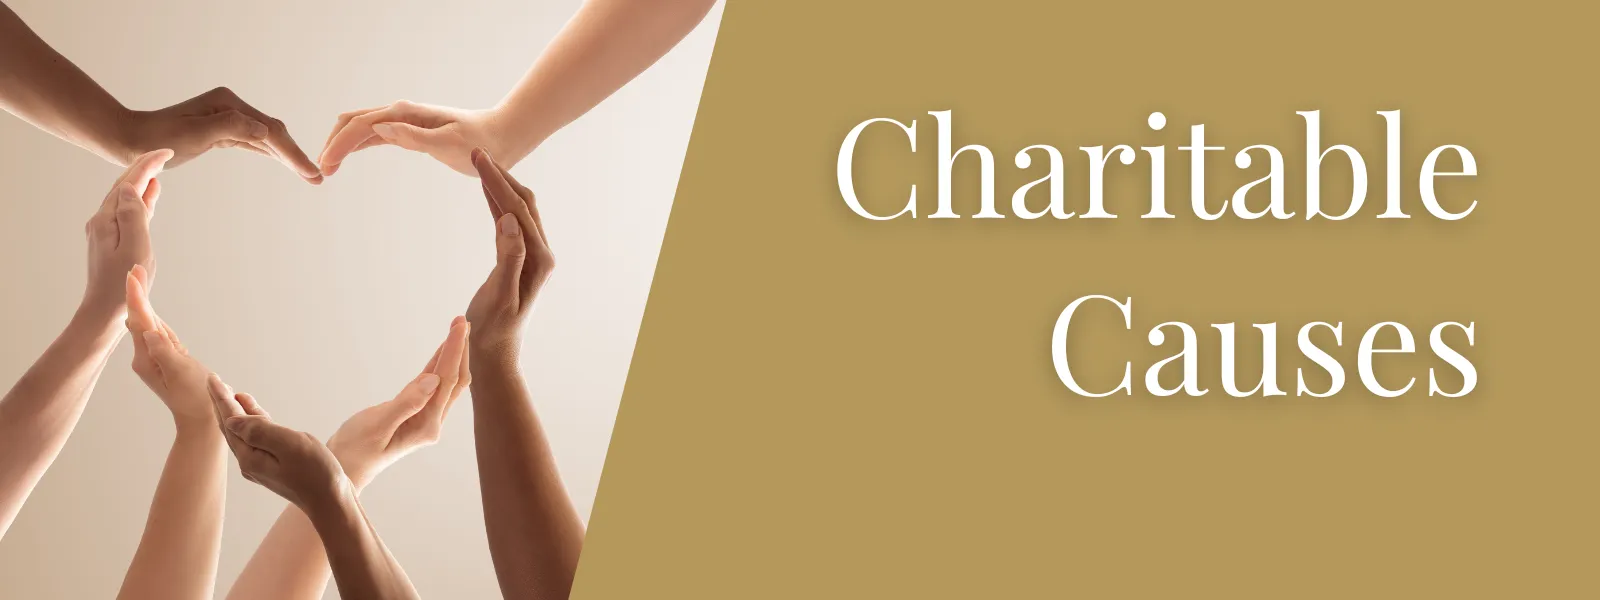 Charitable Causes Banner Image